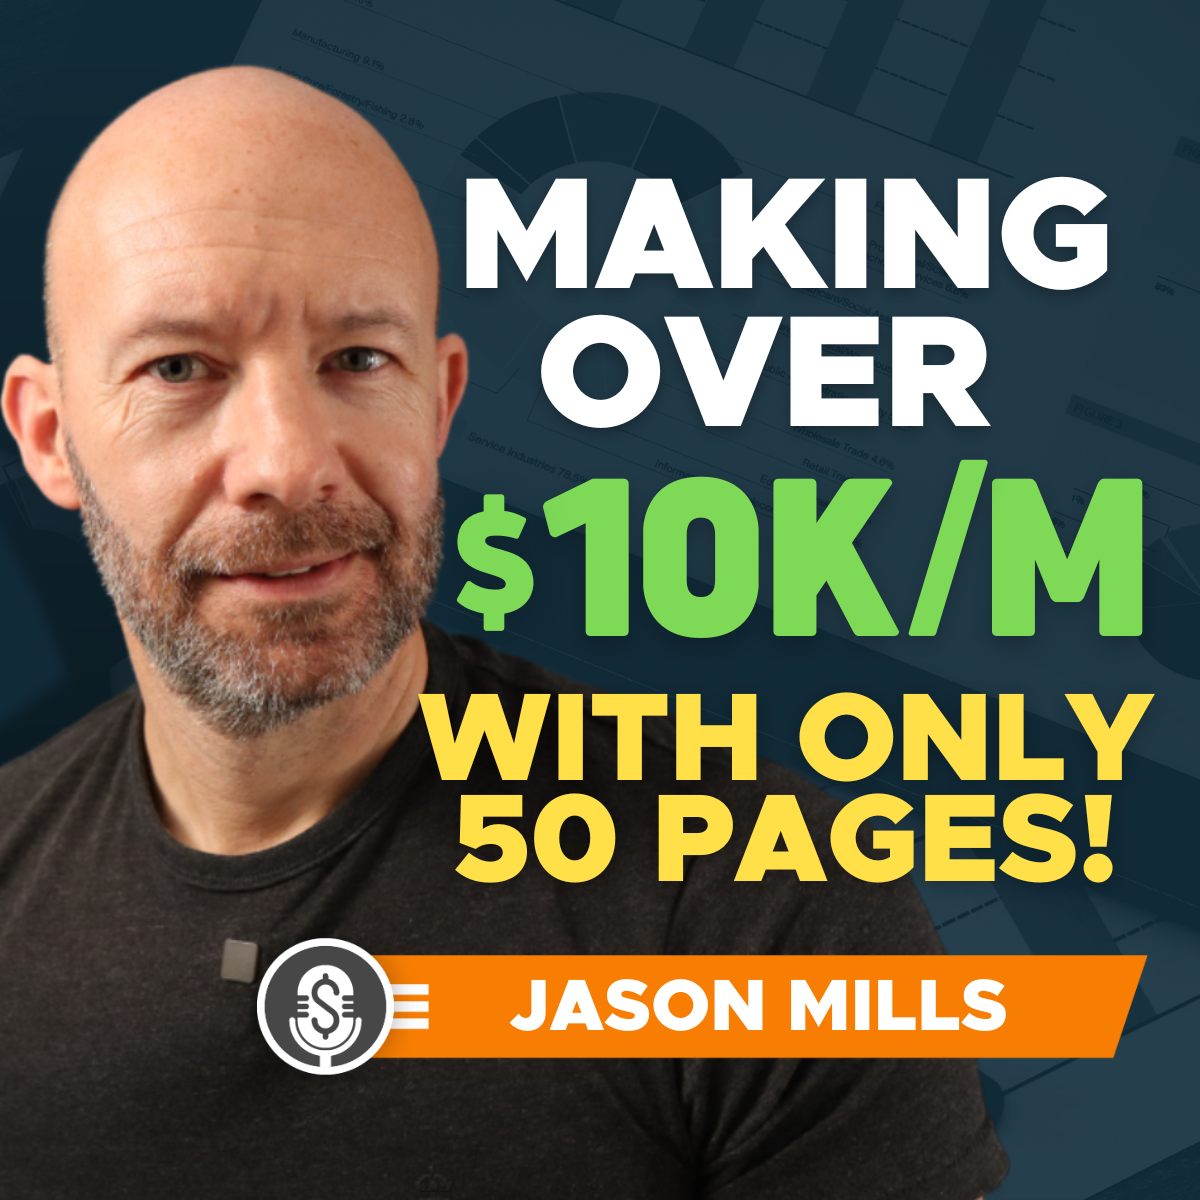 Jason Mills on making OVER $10k/m with only 50 pages!